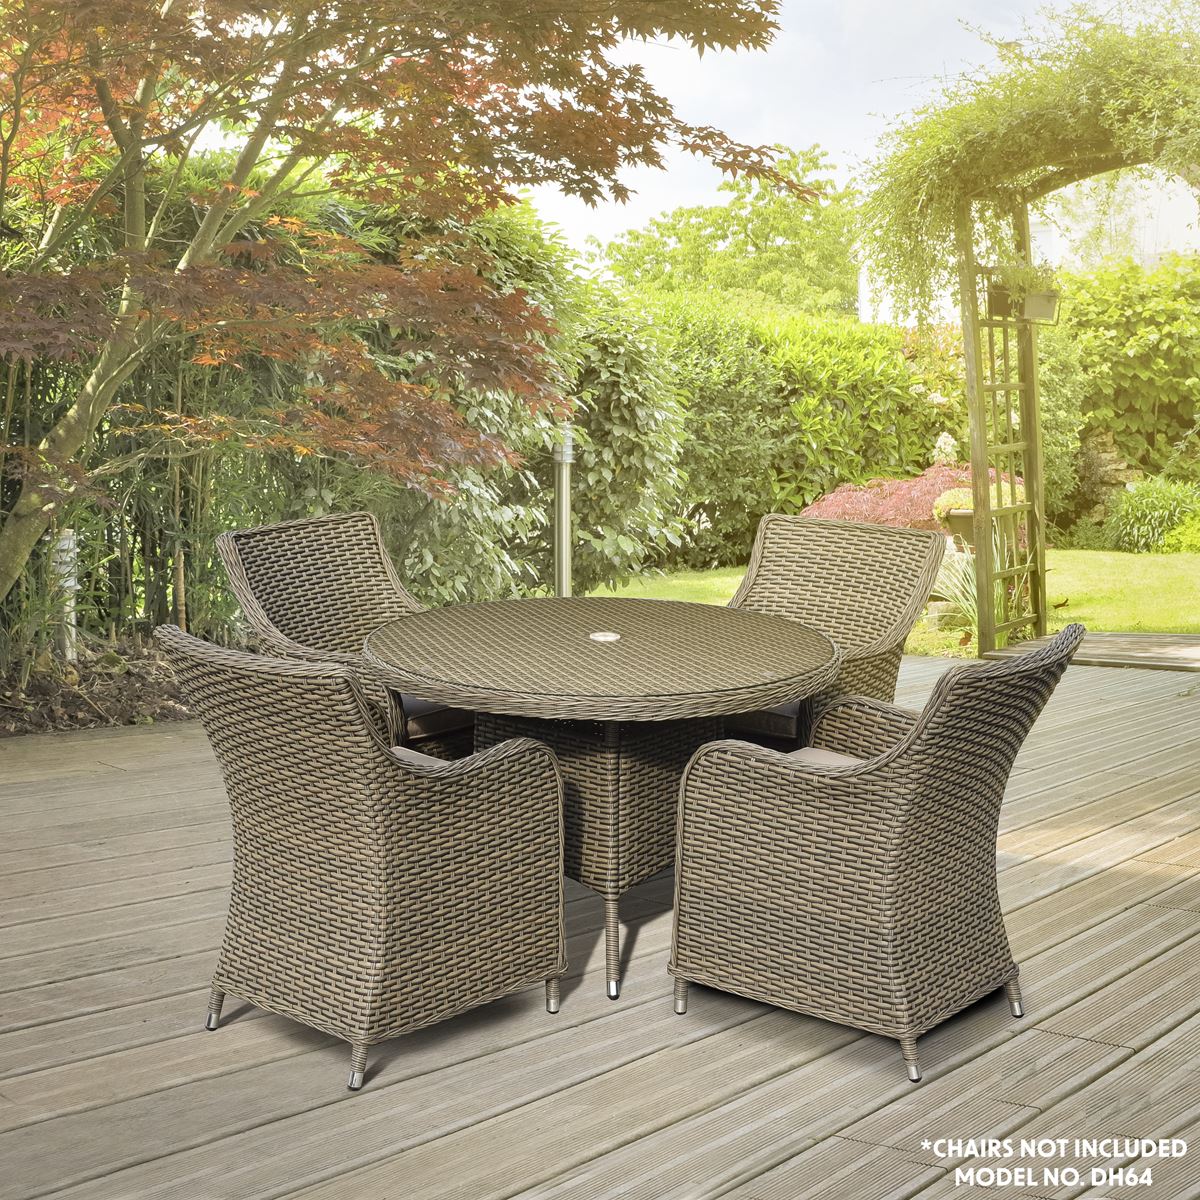 Dellonda Chester Rattan Wicker Outdoor Dining Table with Tempered Glass Top, Brown